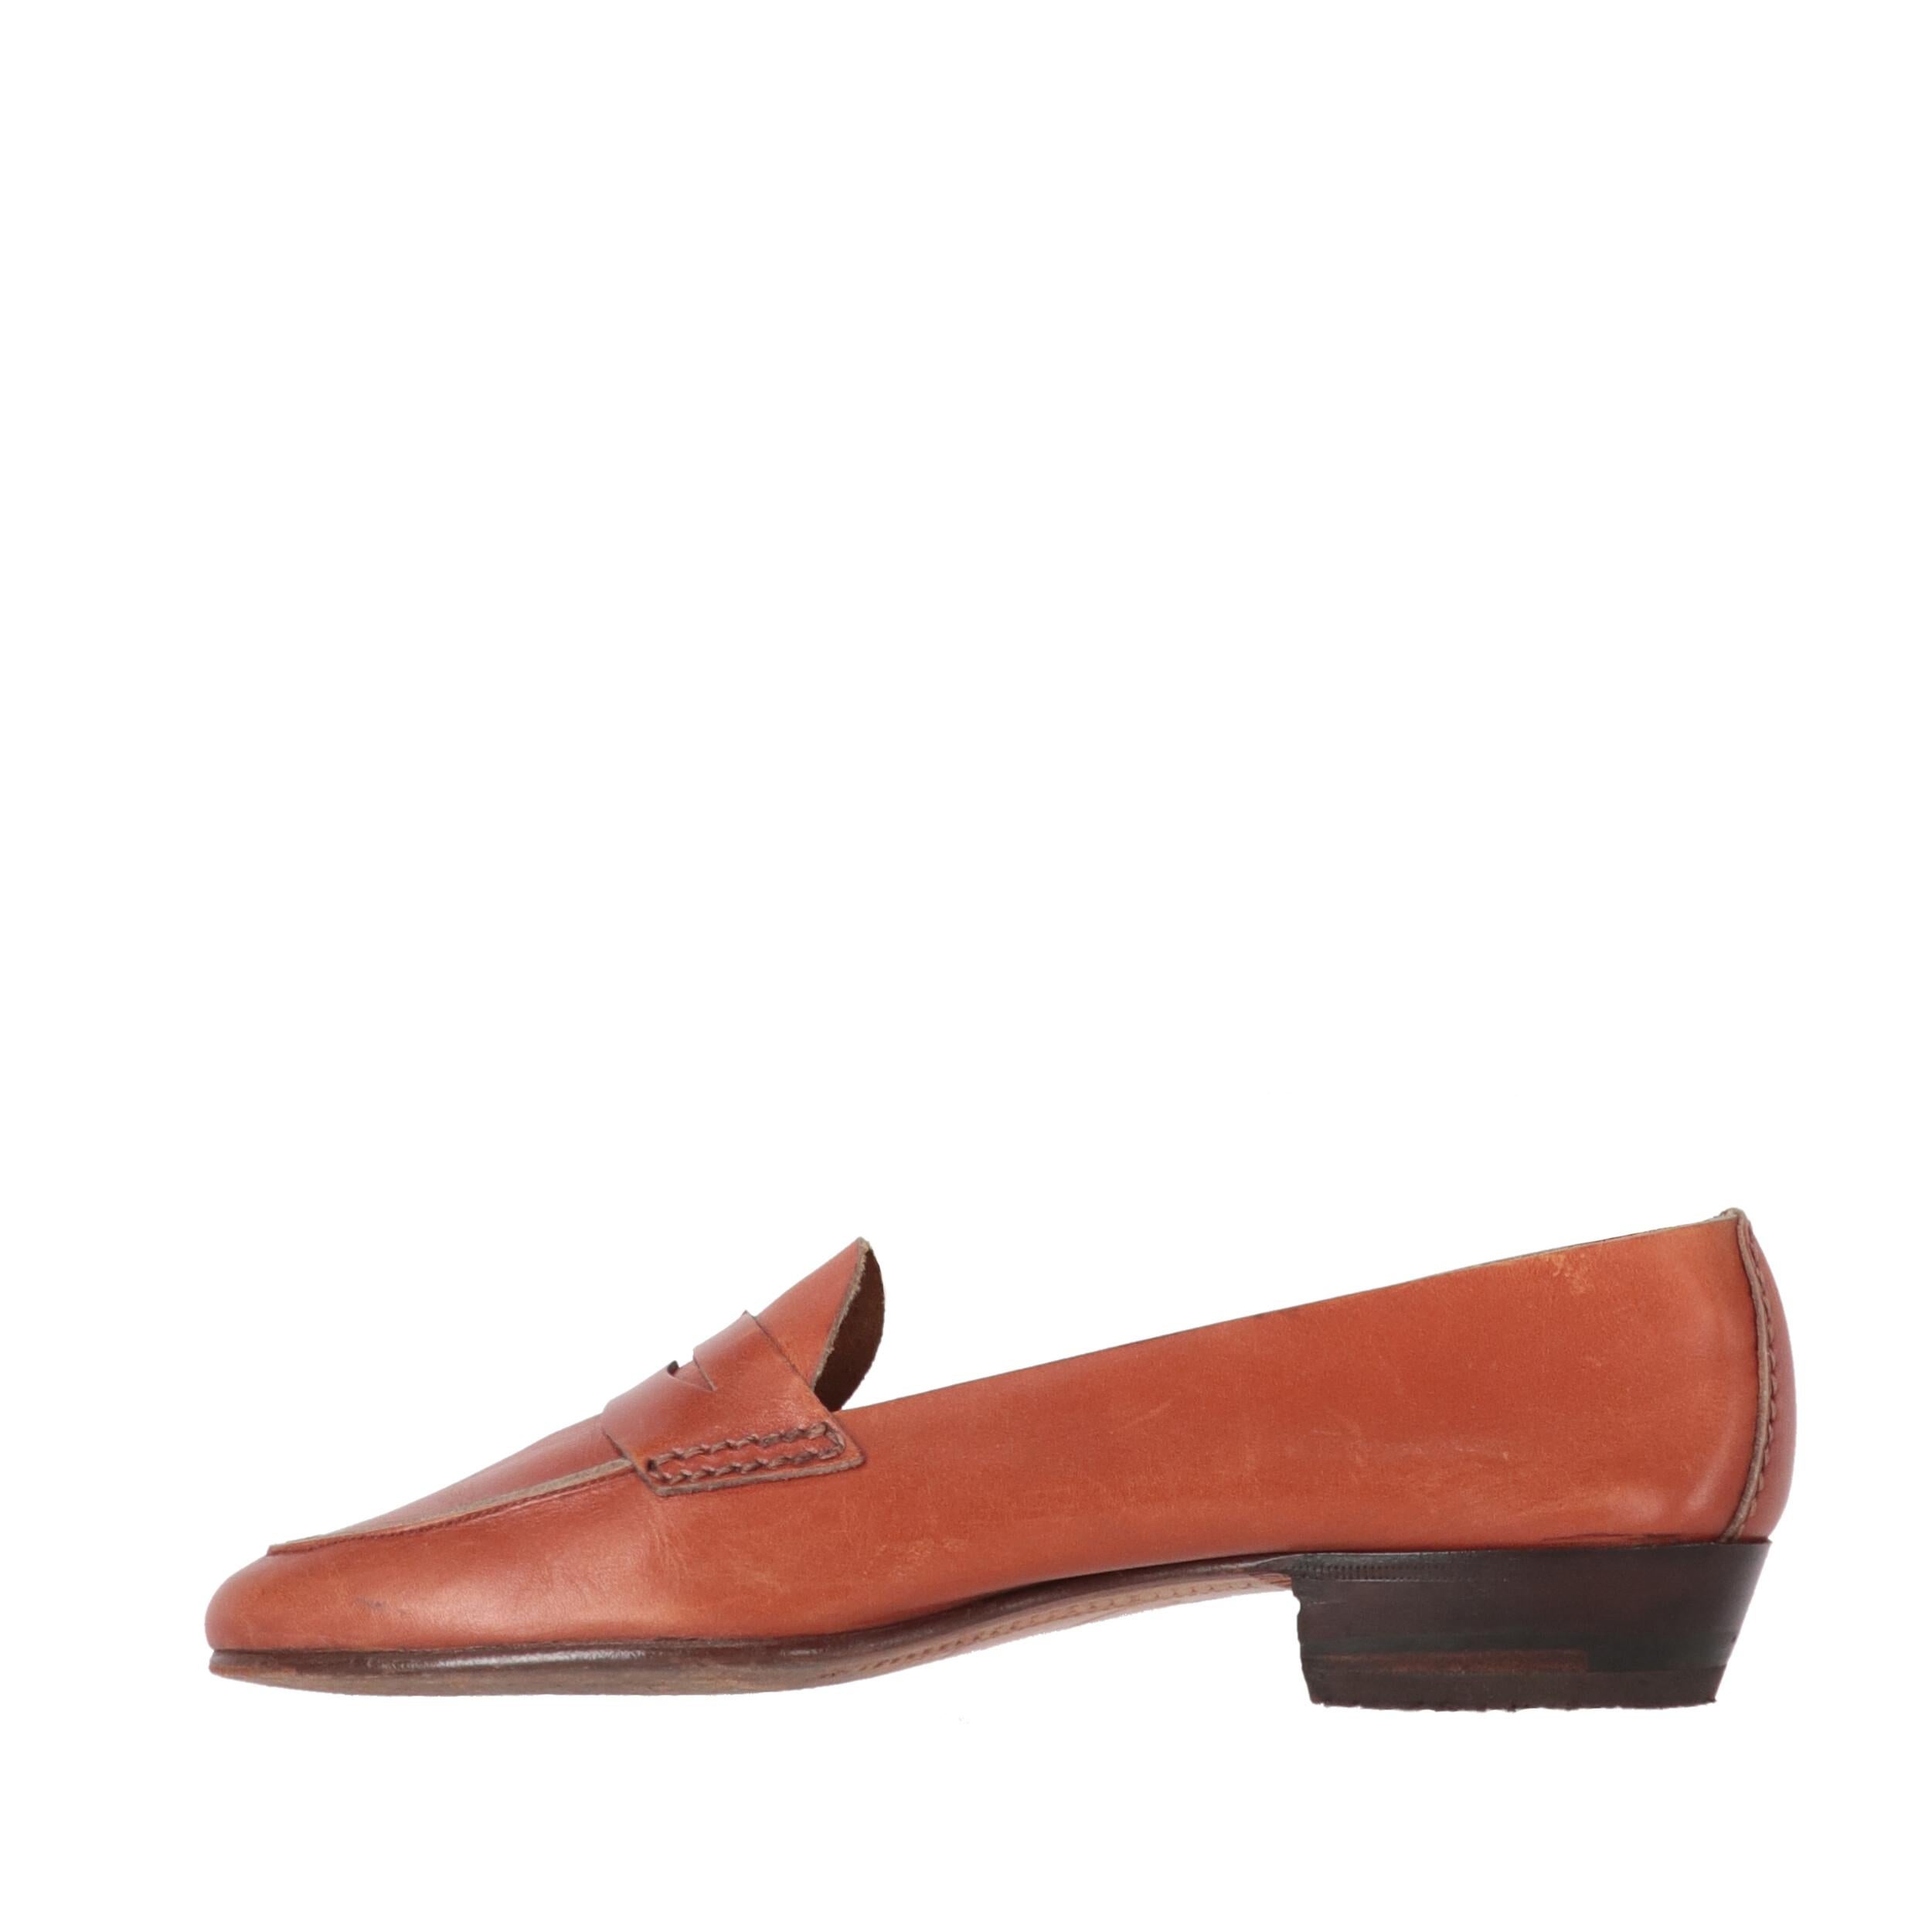 Church's orange brown leather loafers. Low heel, almond toe and vamp.

The item shows slight signs of wear as shown in the pictures.
Years: 80s

Size: 37 ½ EU

Heel height: 2,5 cm
Insole: 24,5 cm